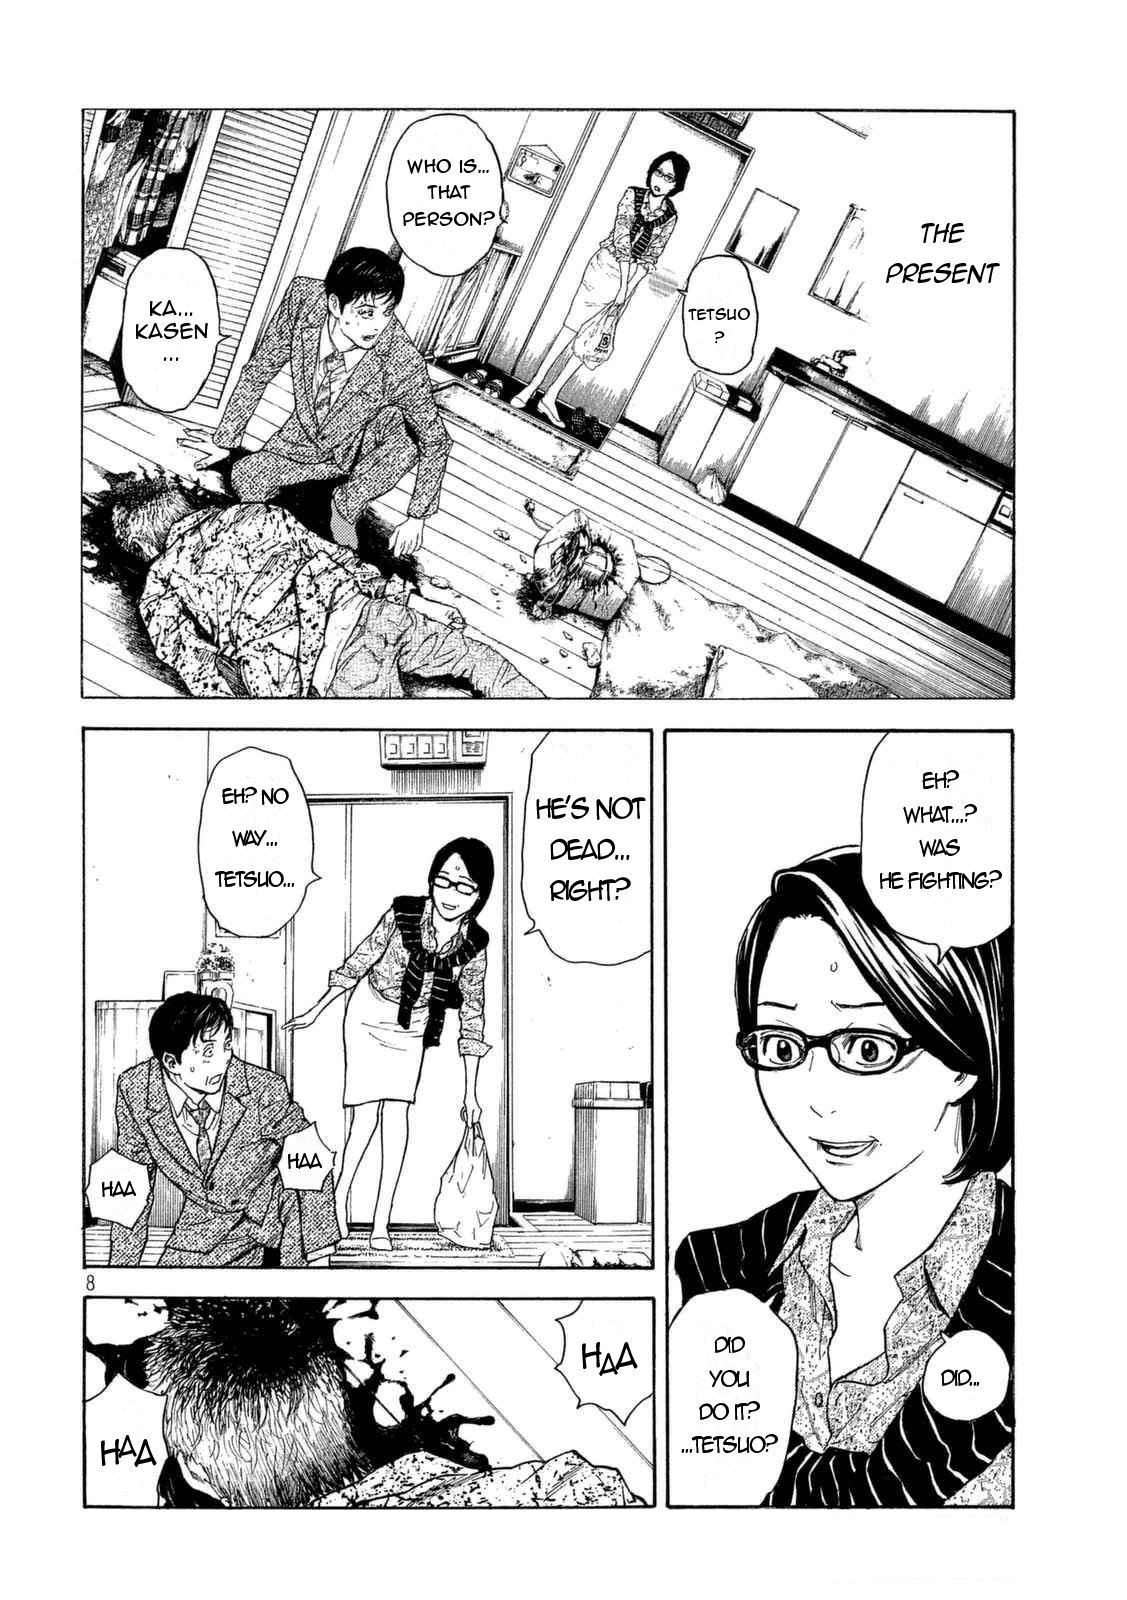 My Home Hero Vol. 1 Ch. 2 My Wife Was The First To Arrive At The Scene of The Crime